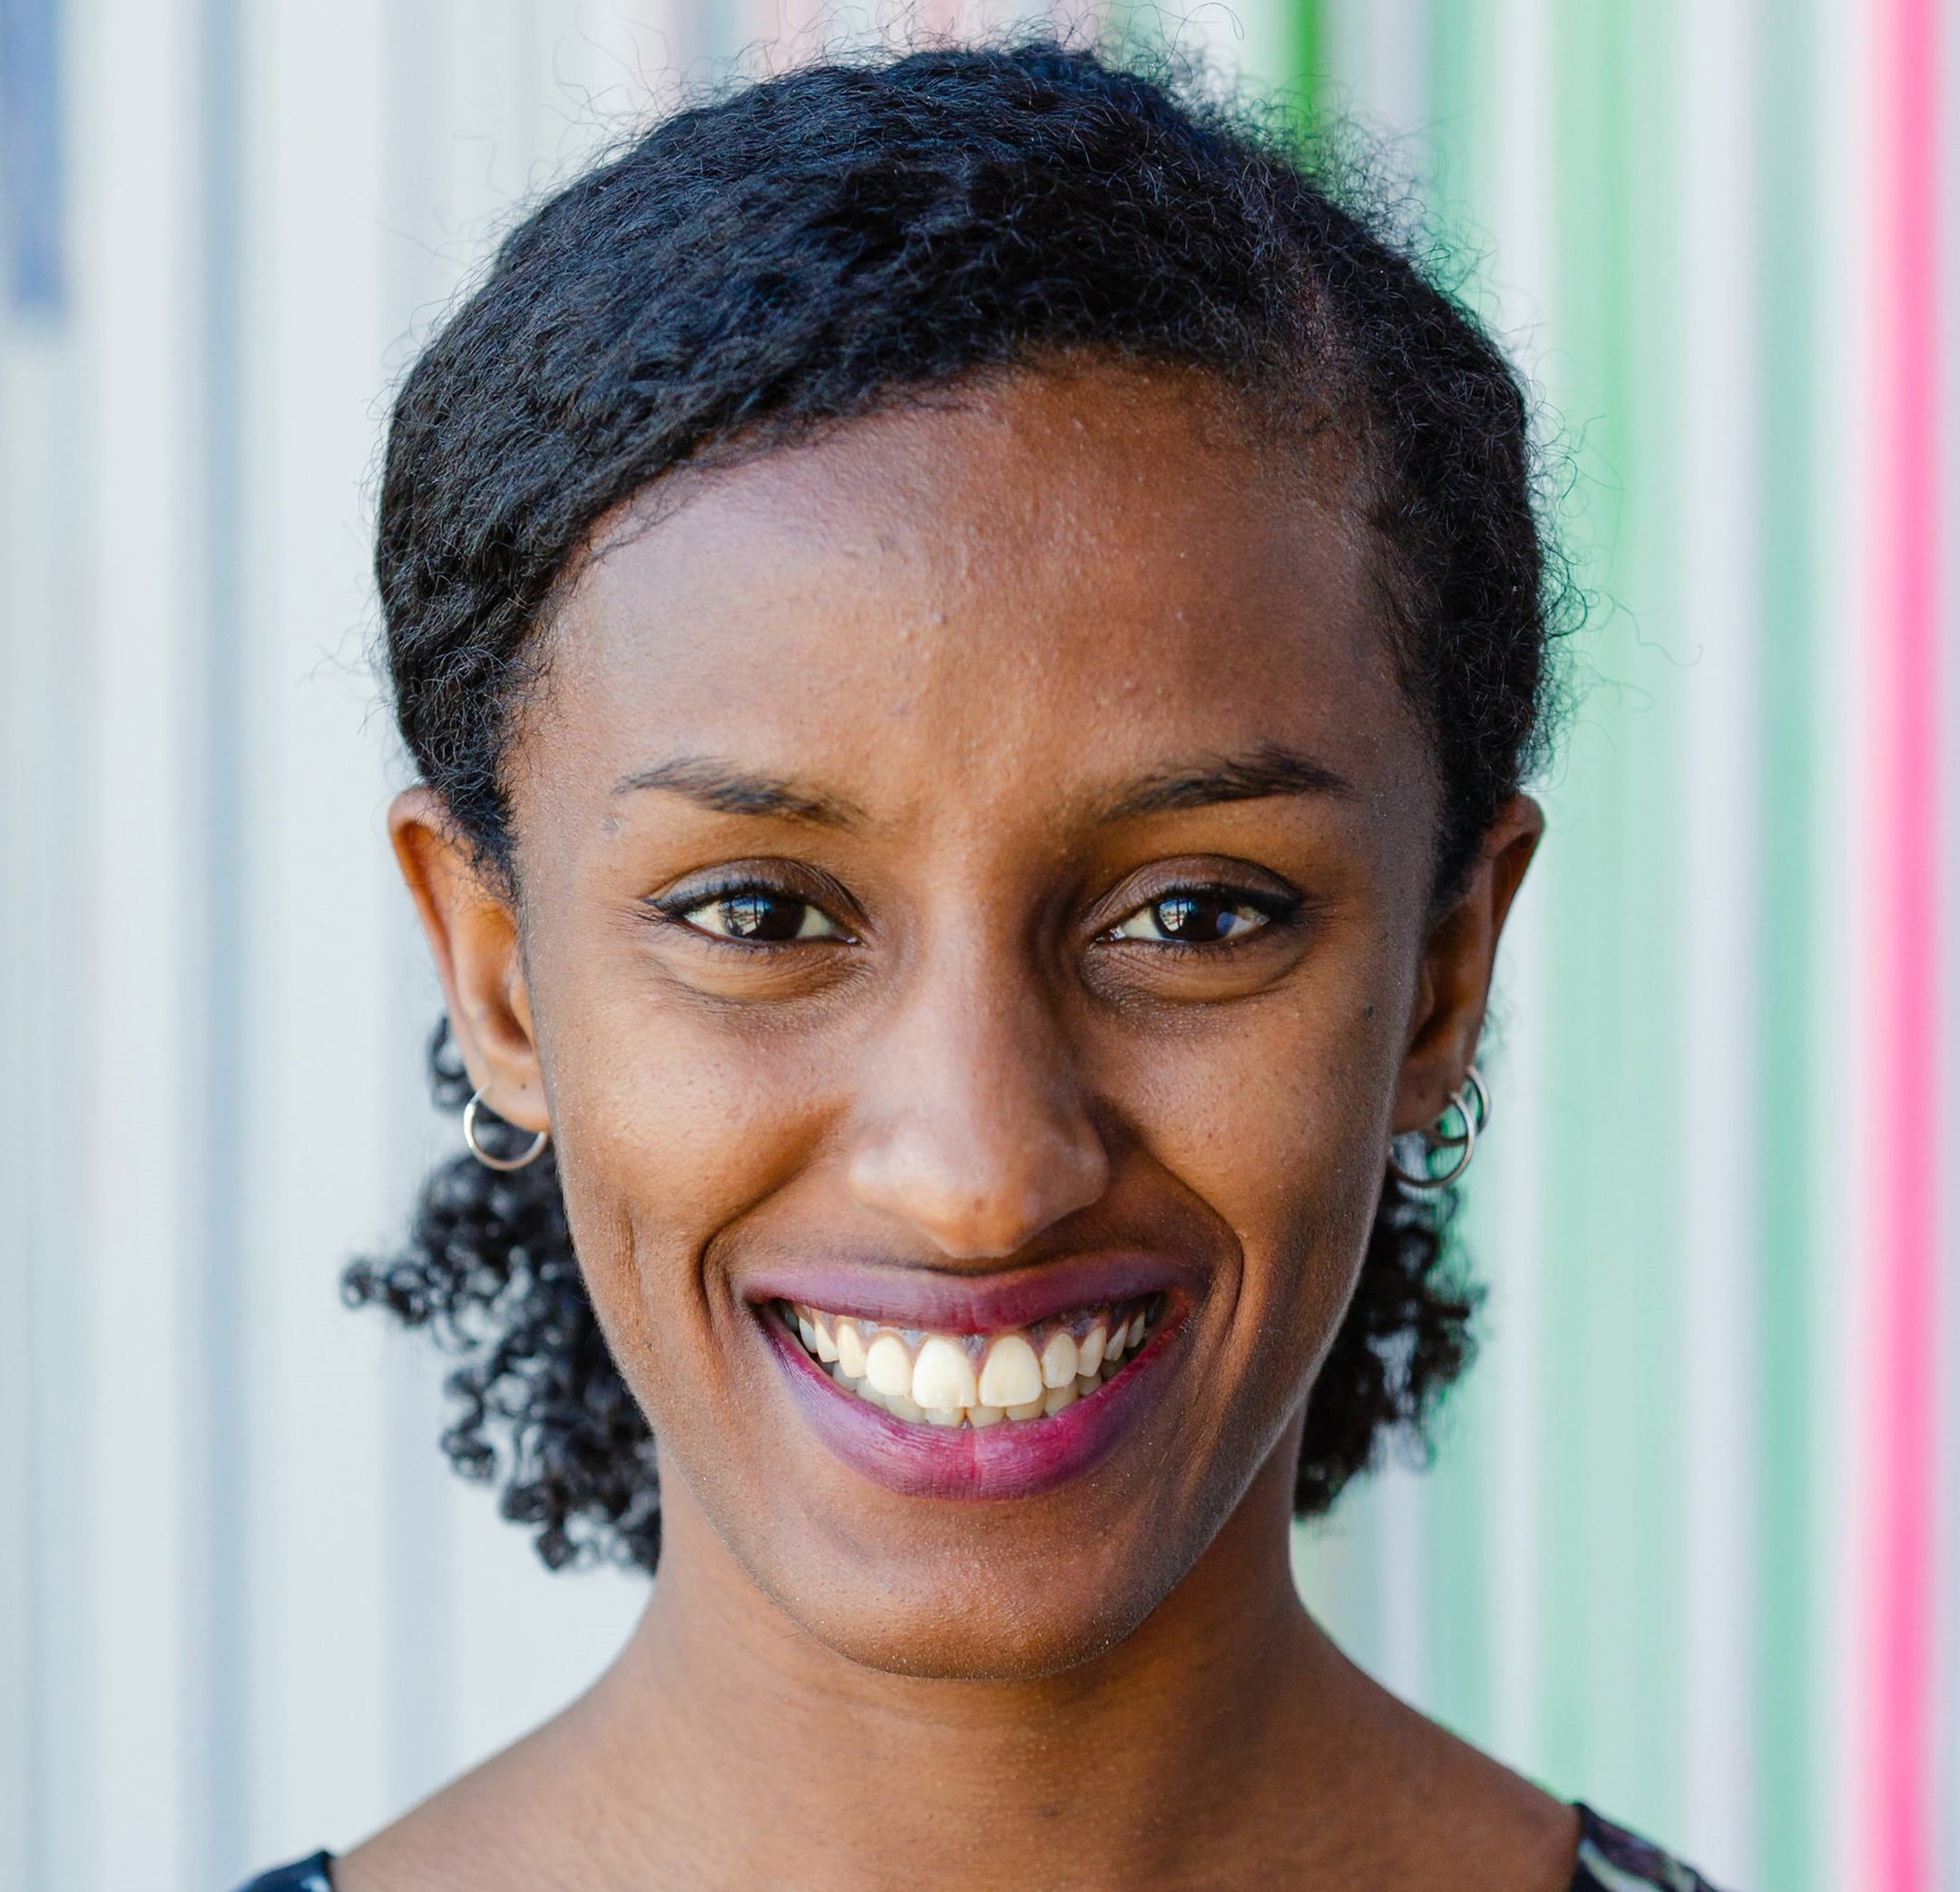 Photo of Rediet Abebe smiling against a striped background 